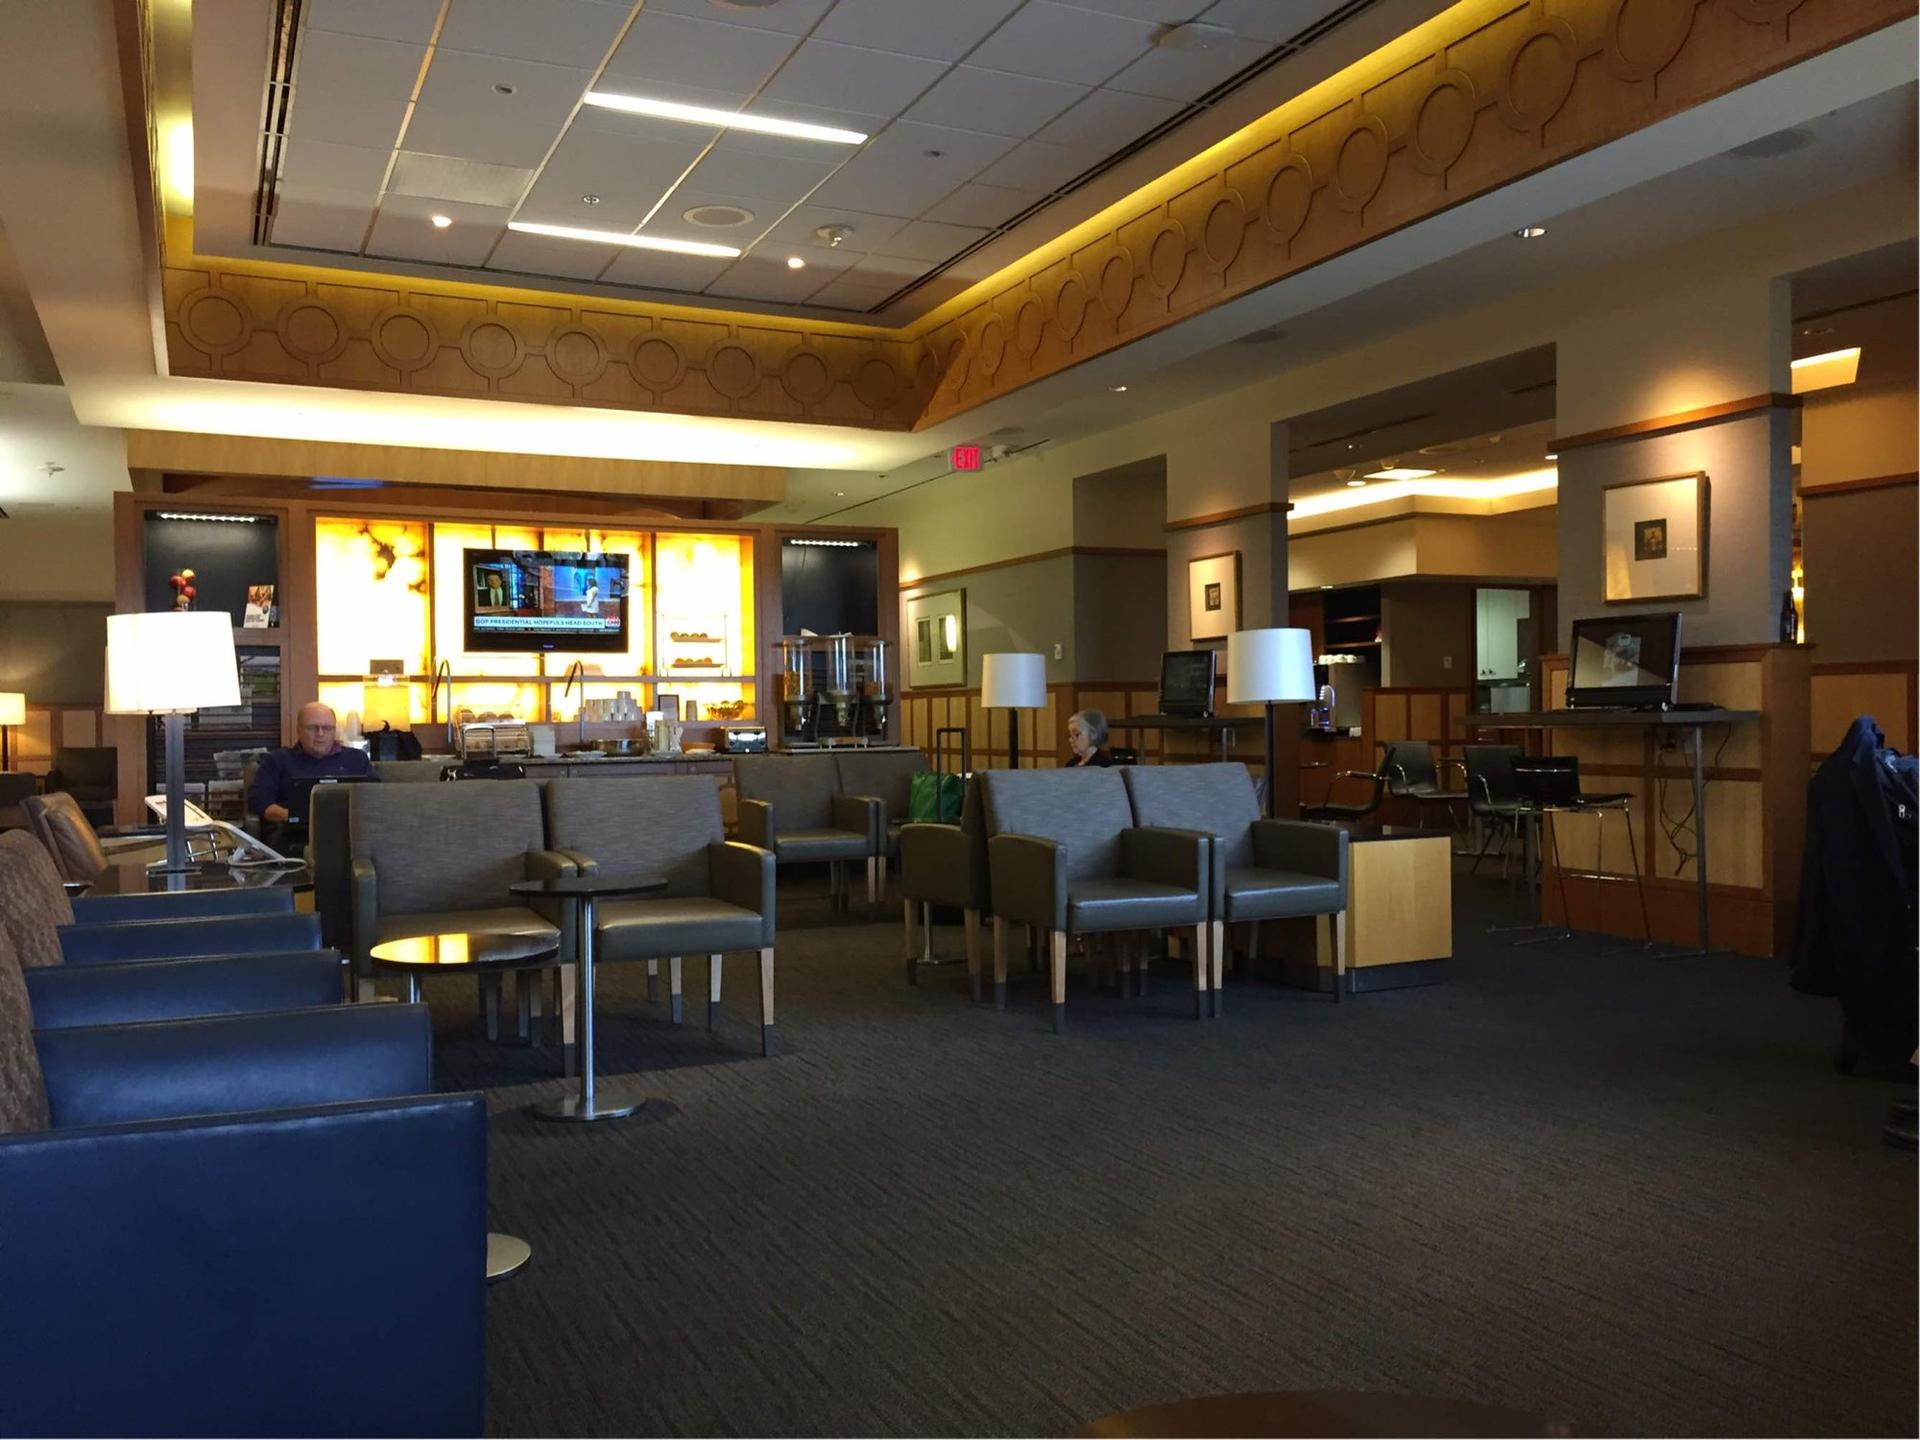 American Airlines Admirals Club image 5 of 7